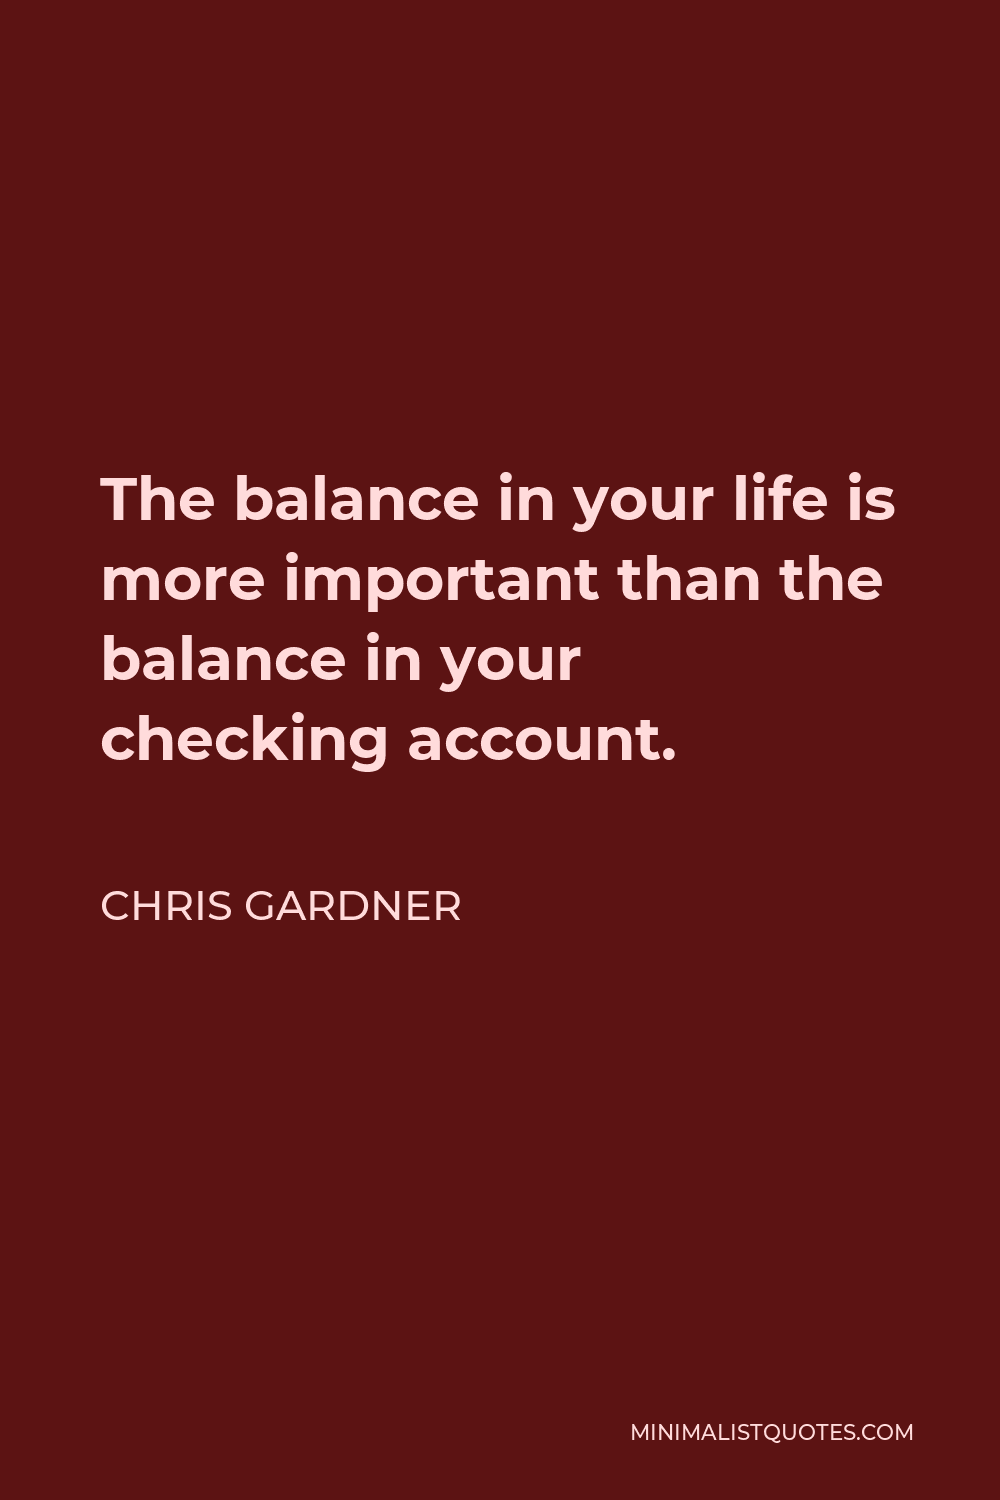 Chris Gardner Quote - The balance in your life is more important than the balance in your checking account.